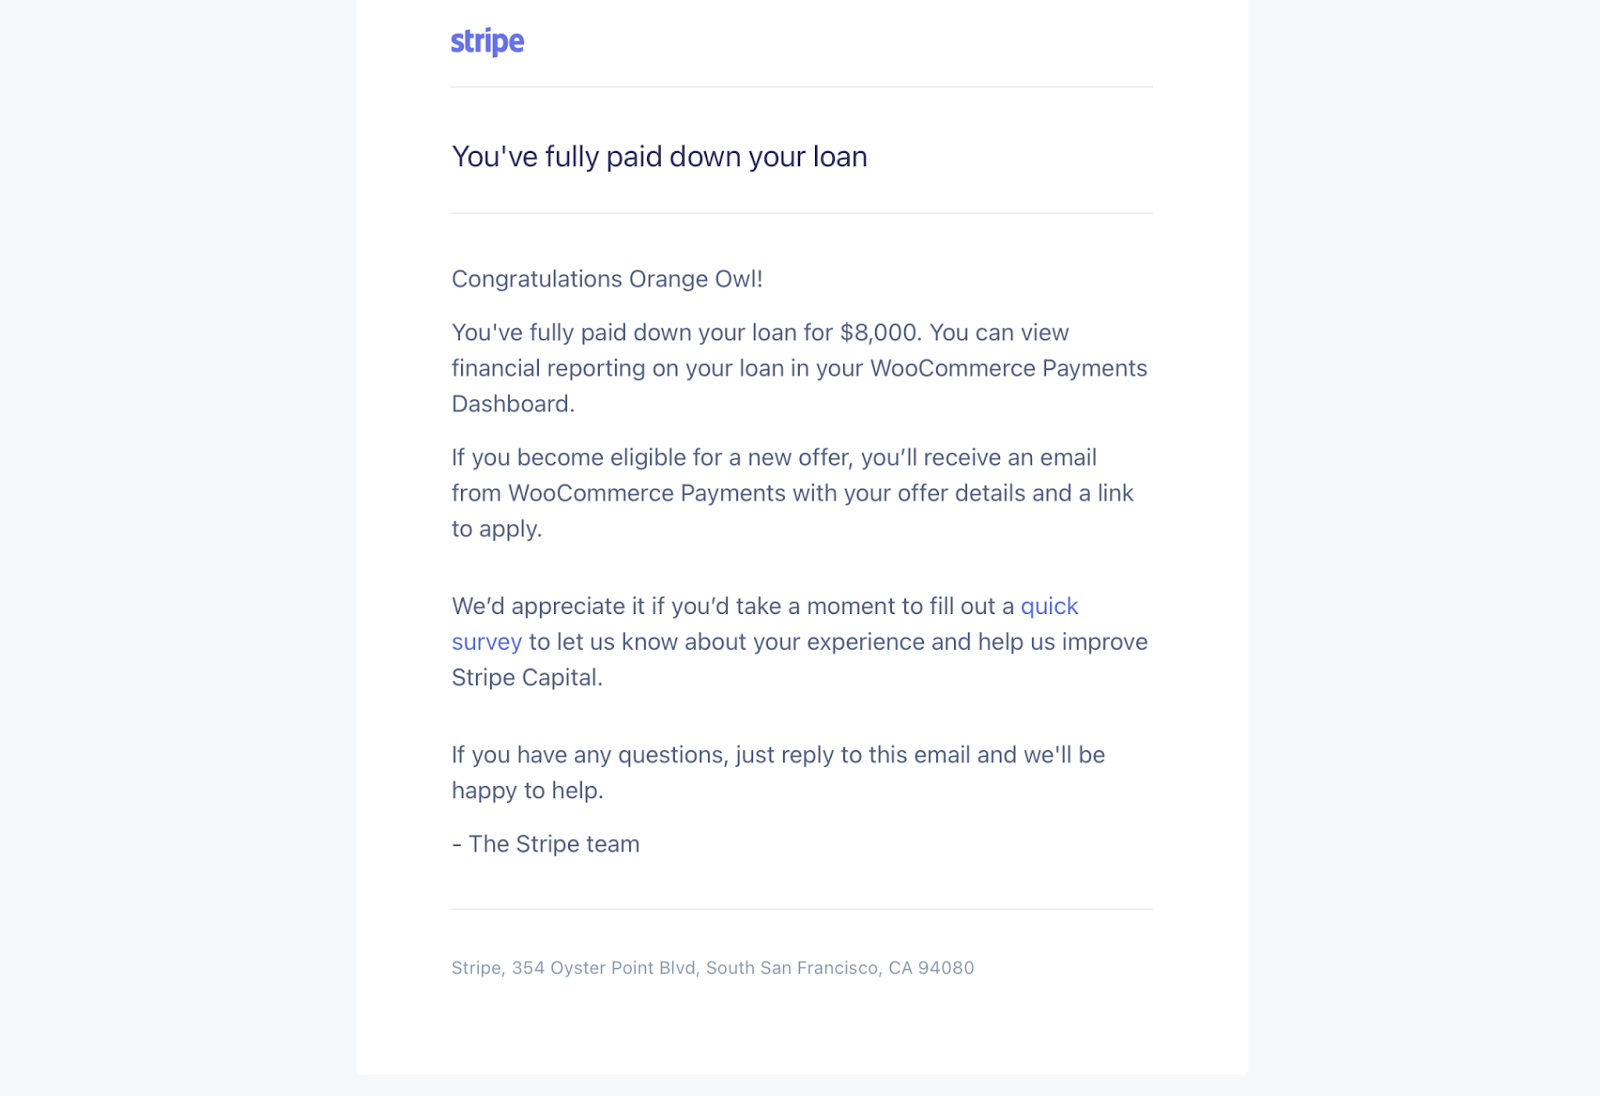 An example email from Stripe received once a loan has been fully repaid. 